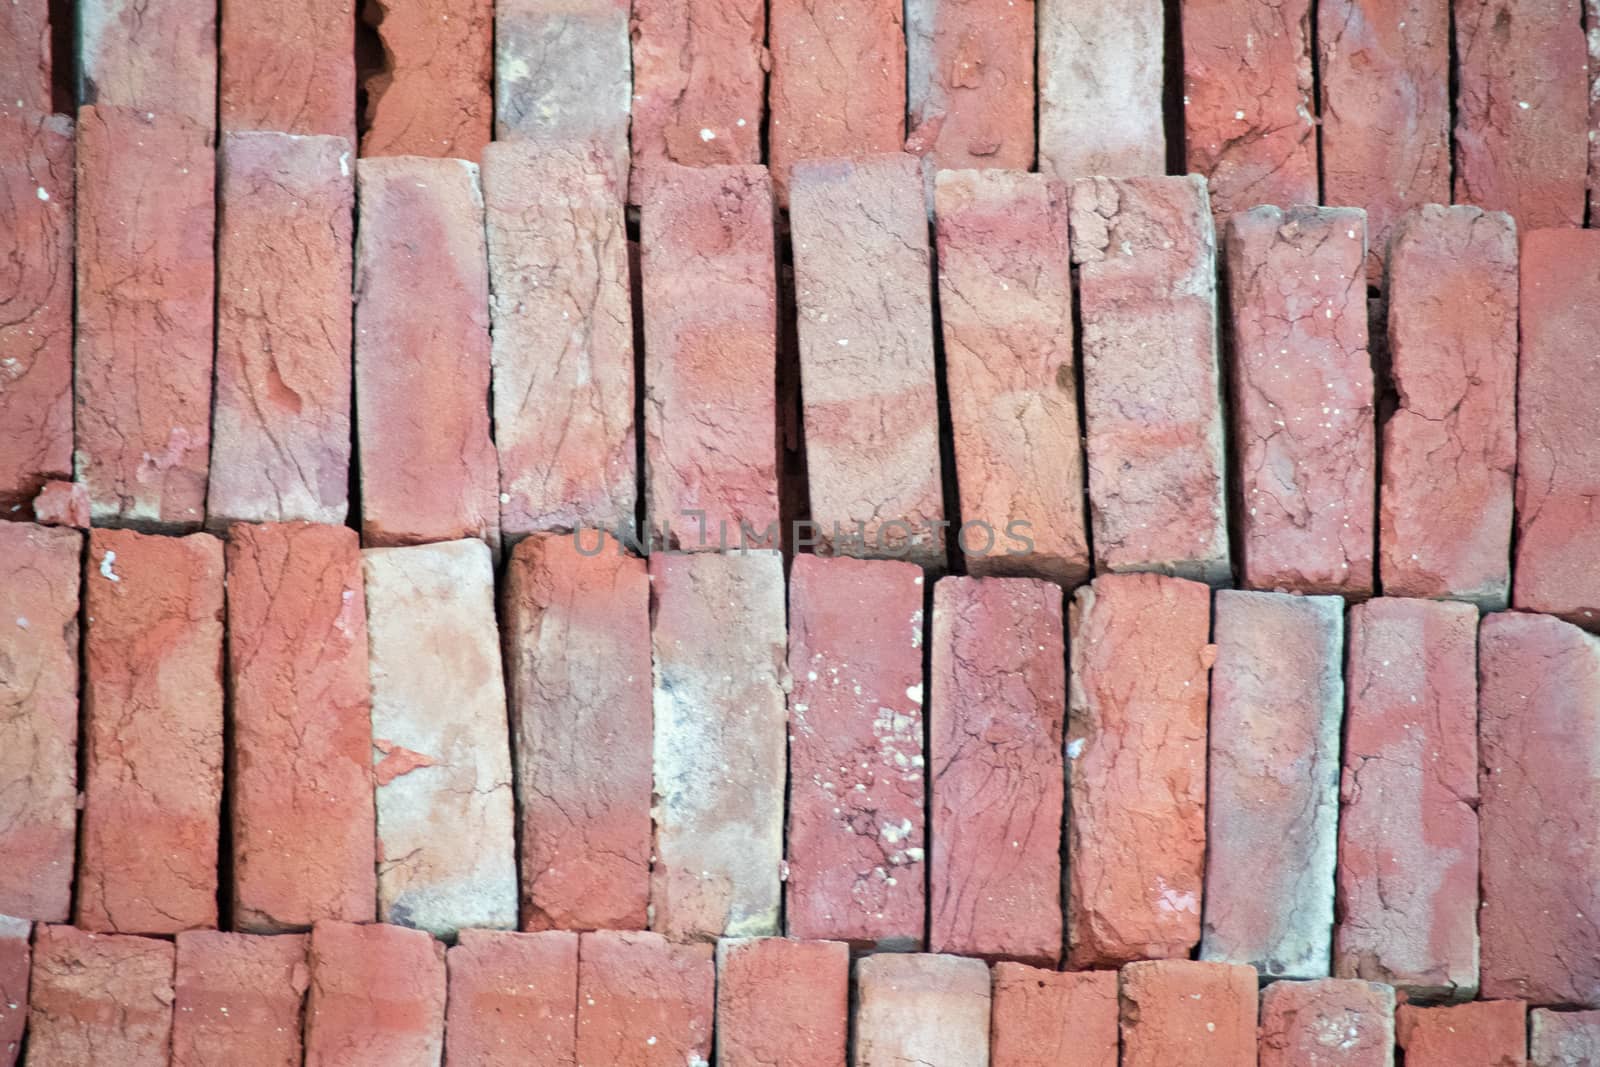 Pile of bricks placed on the ground, showing the pattern and the by Shalinimathur